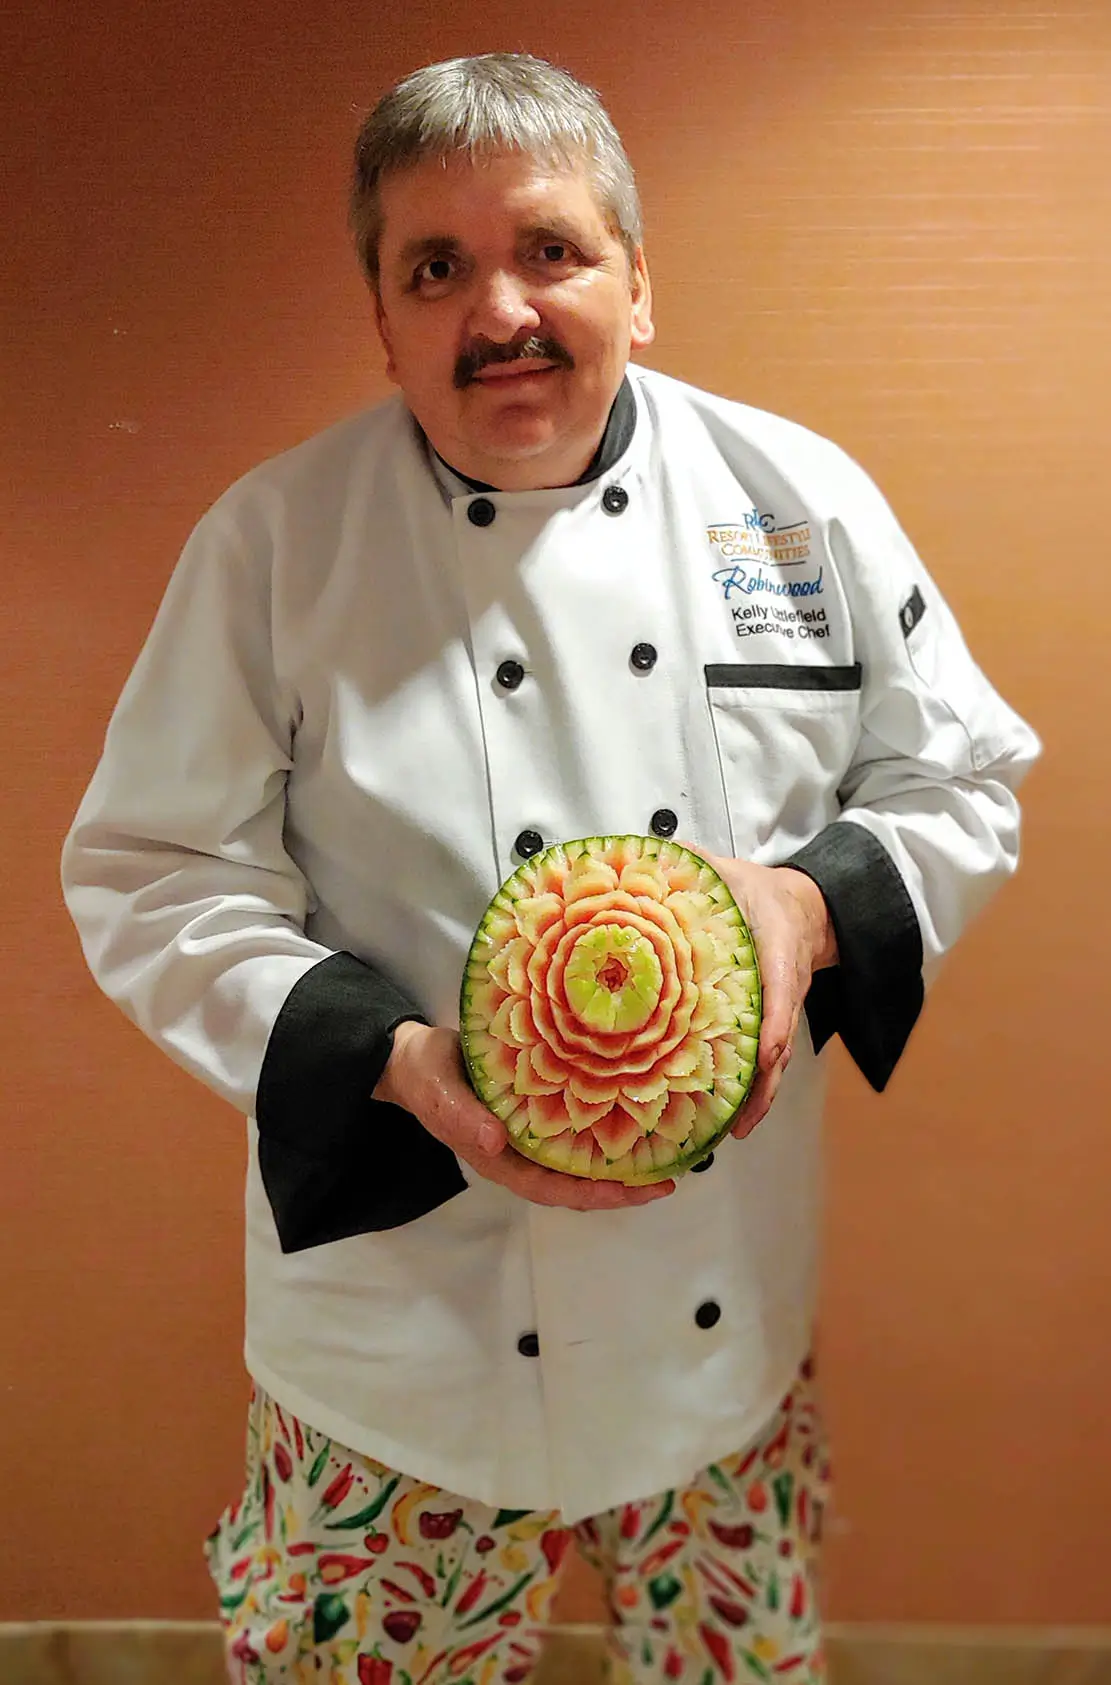 Chef Kelly showing off his carved watermelon.